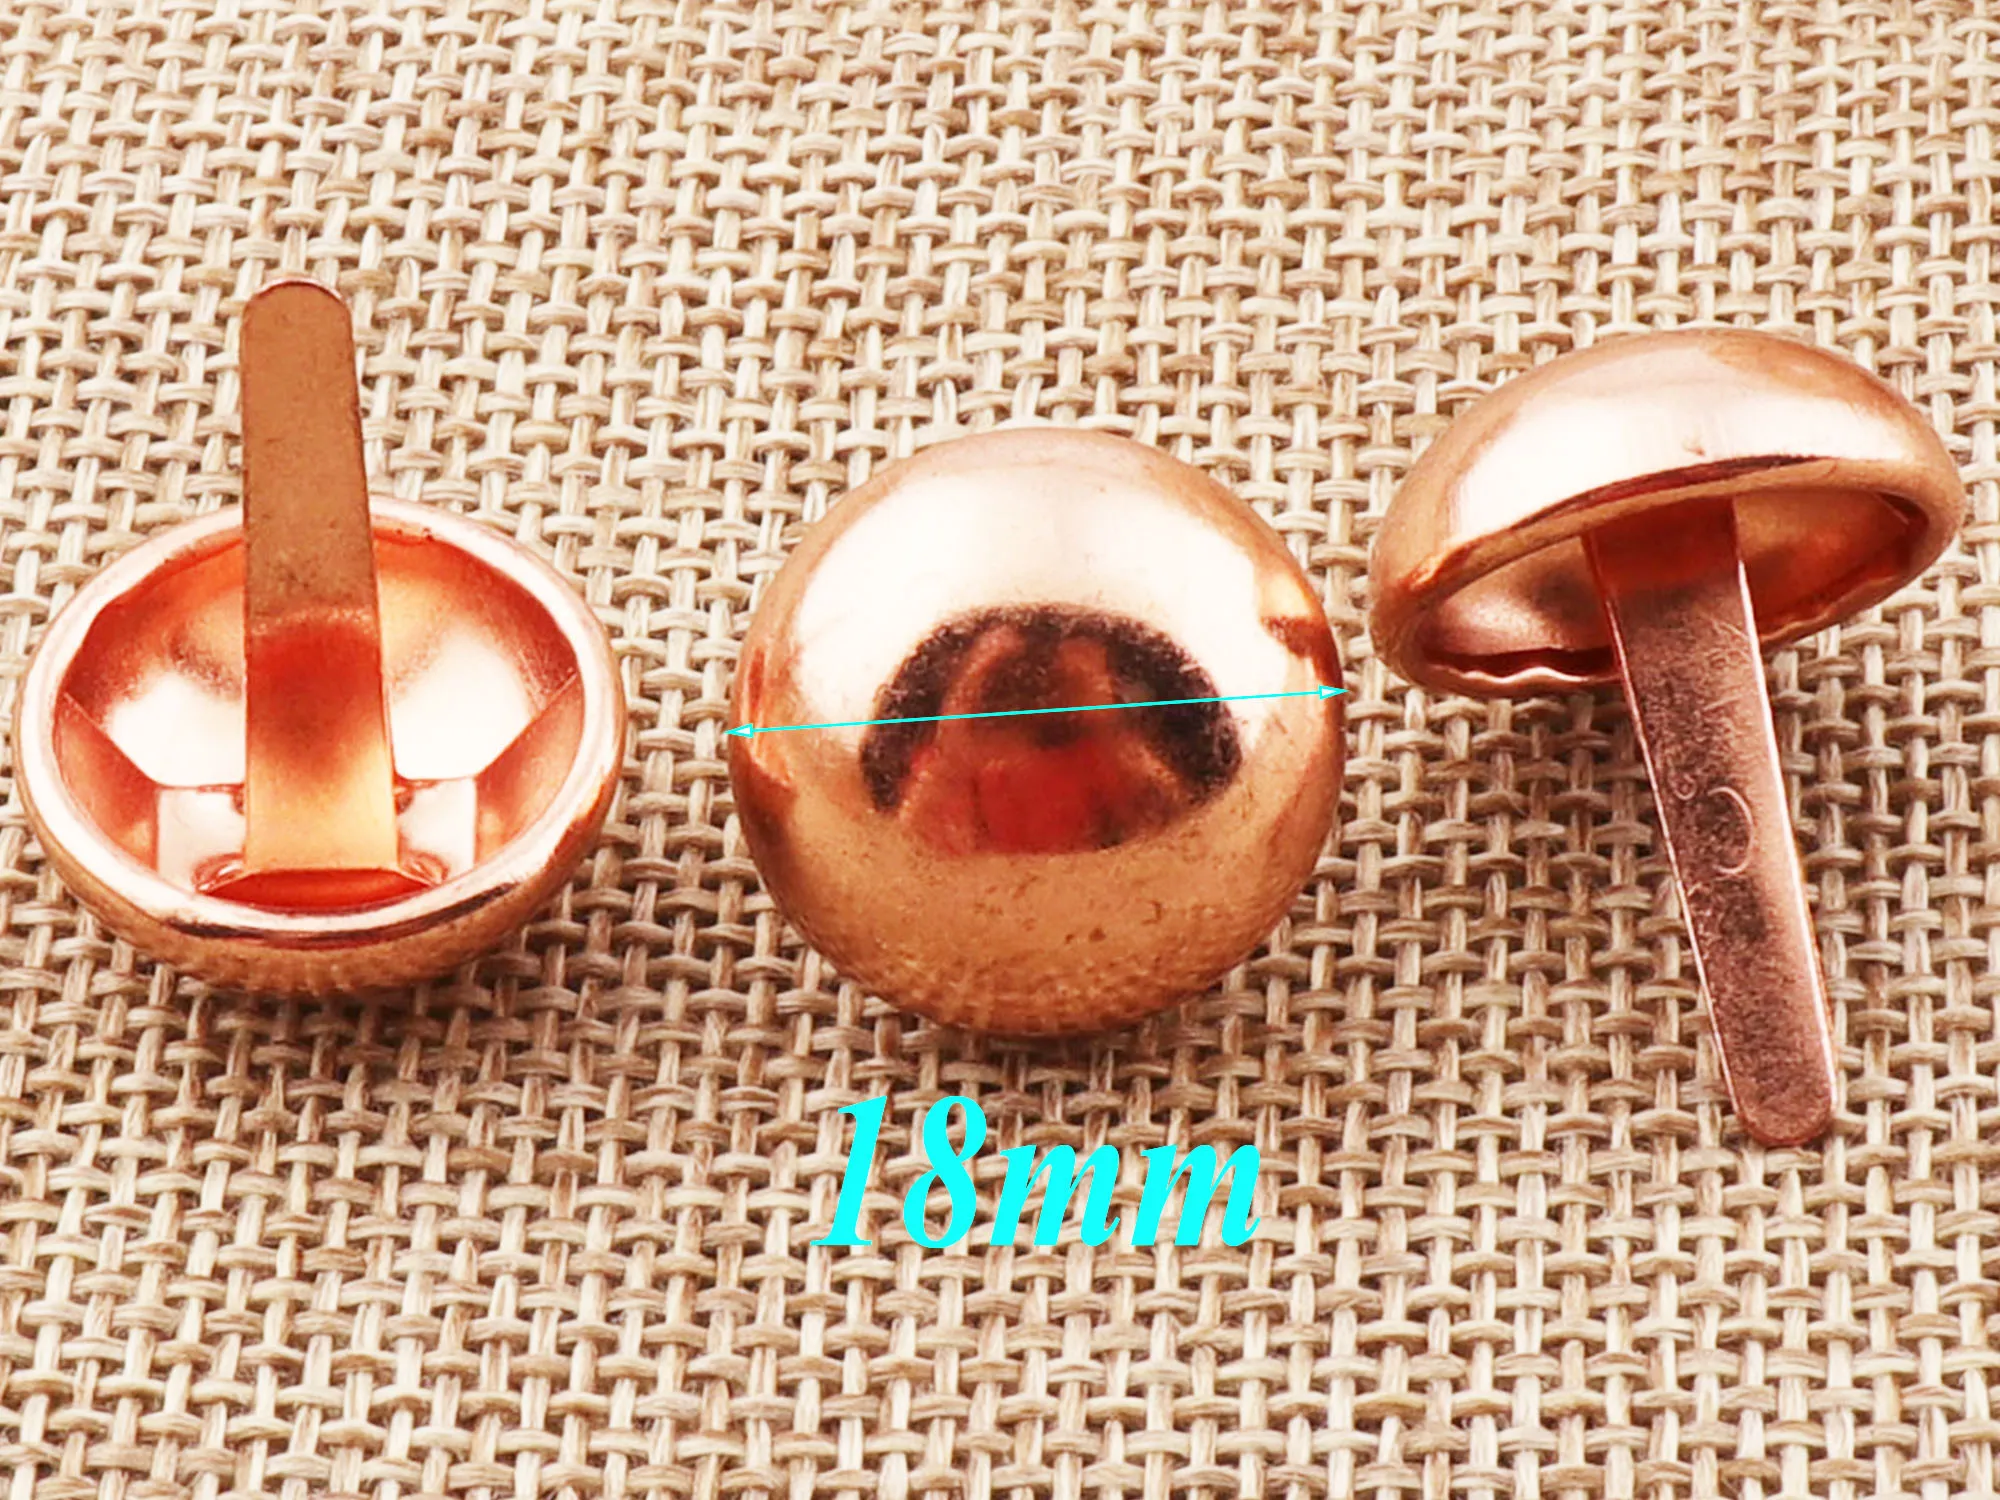 40pcs Rose Gold Purse Feet Round Dome Cone Rivet Round Post Caps handbags Bags Belts 18mm Leather craft Purse Feets